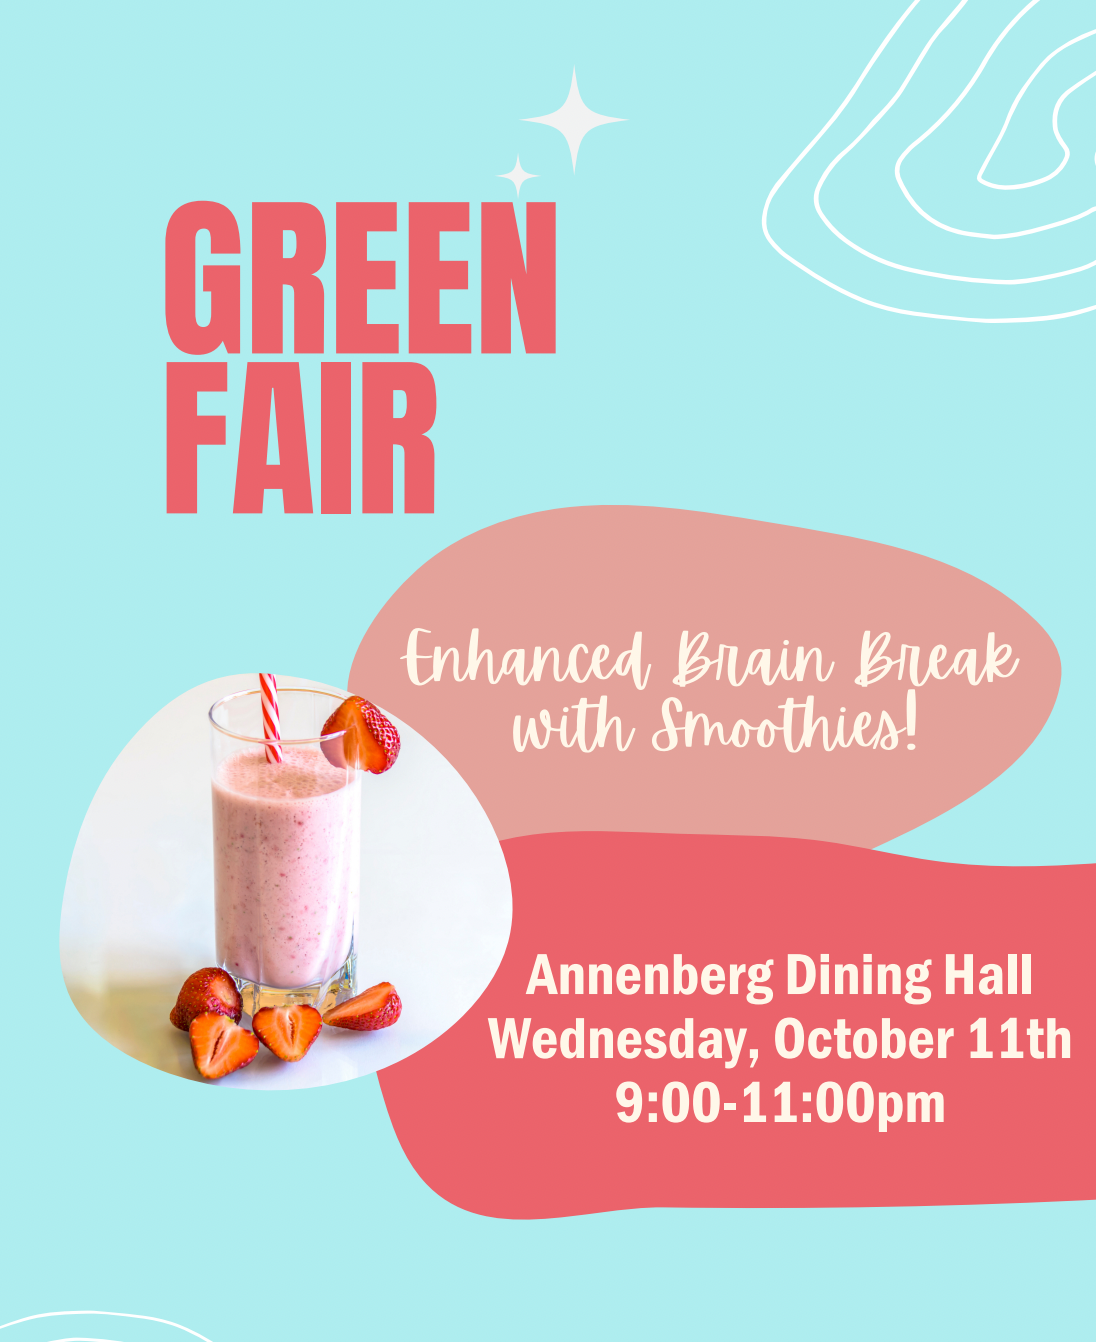 Green Fair enhanced brain break with smoothies! at Annenberg Dining Hall on Wednesday, October 11, 9-11 pm